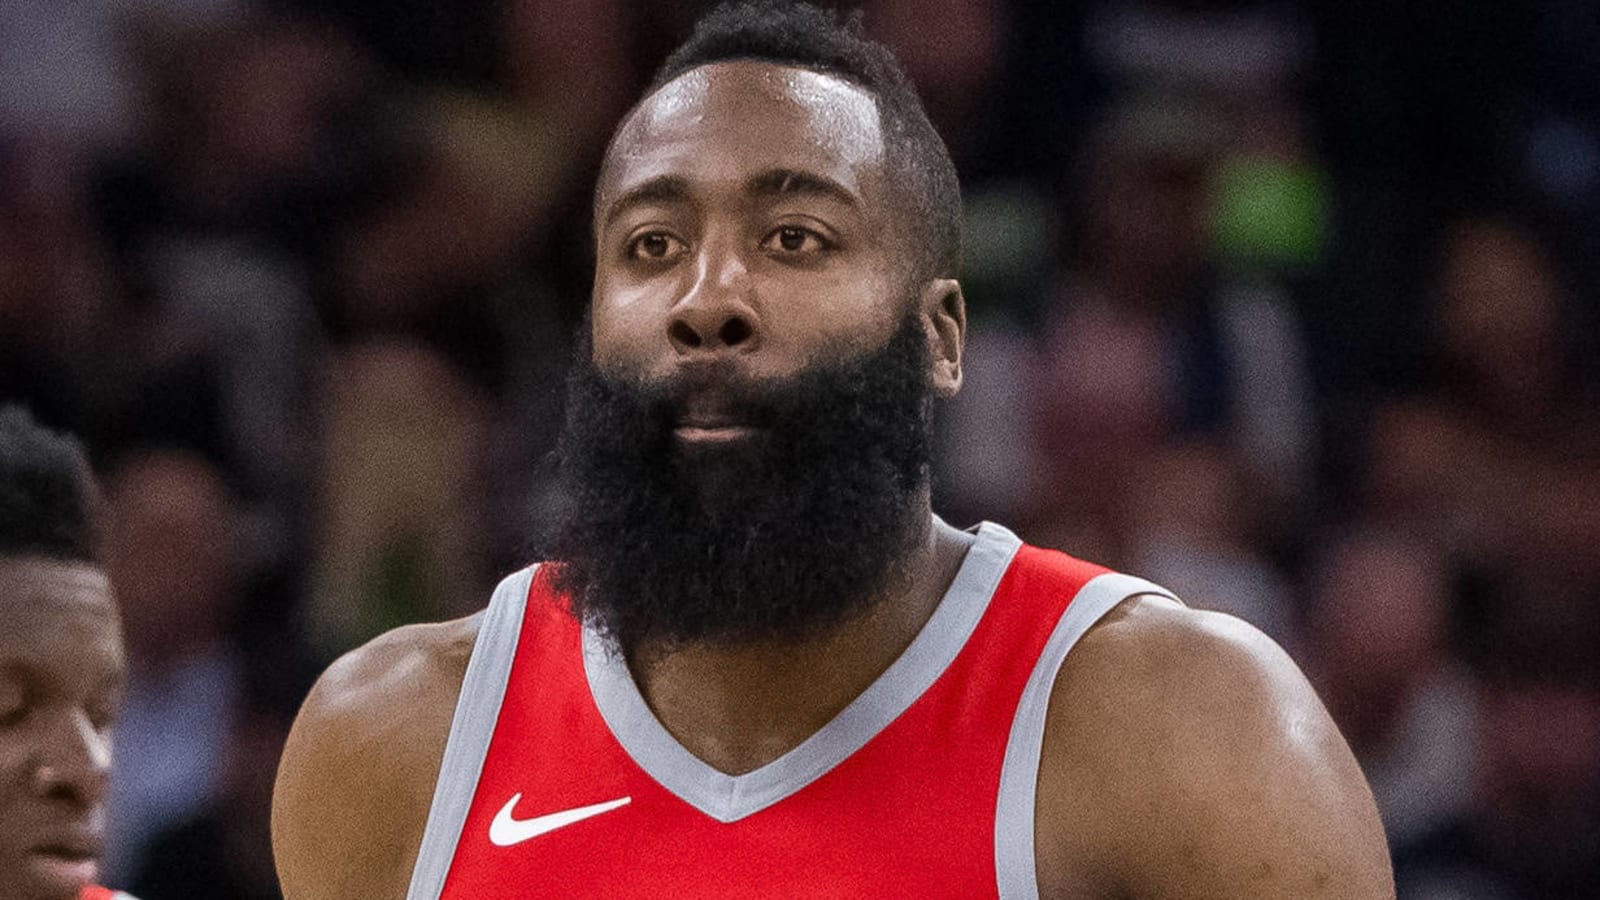 Report: James Harden accused of 'roughing up' woman at nightclub